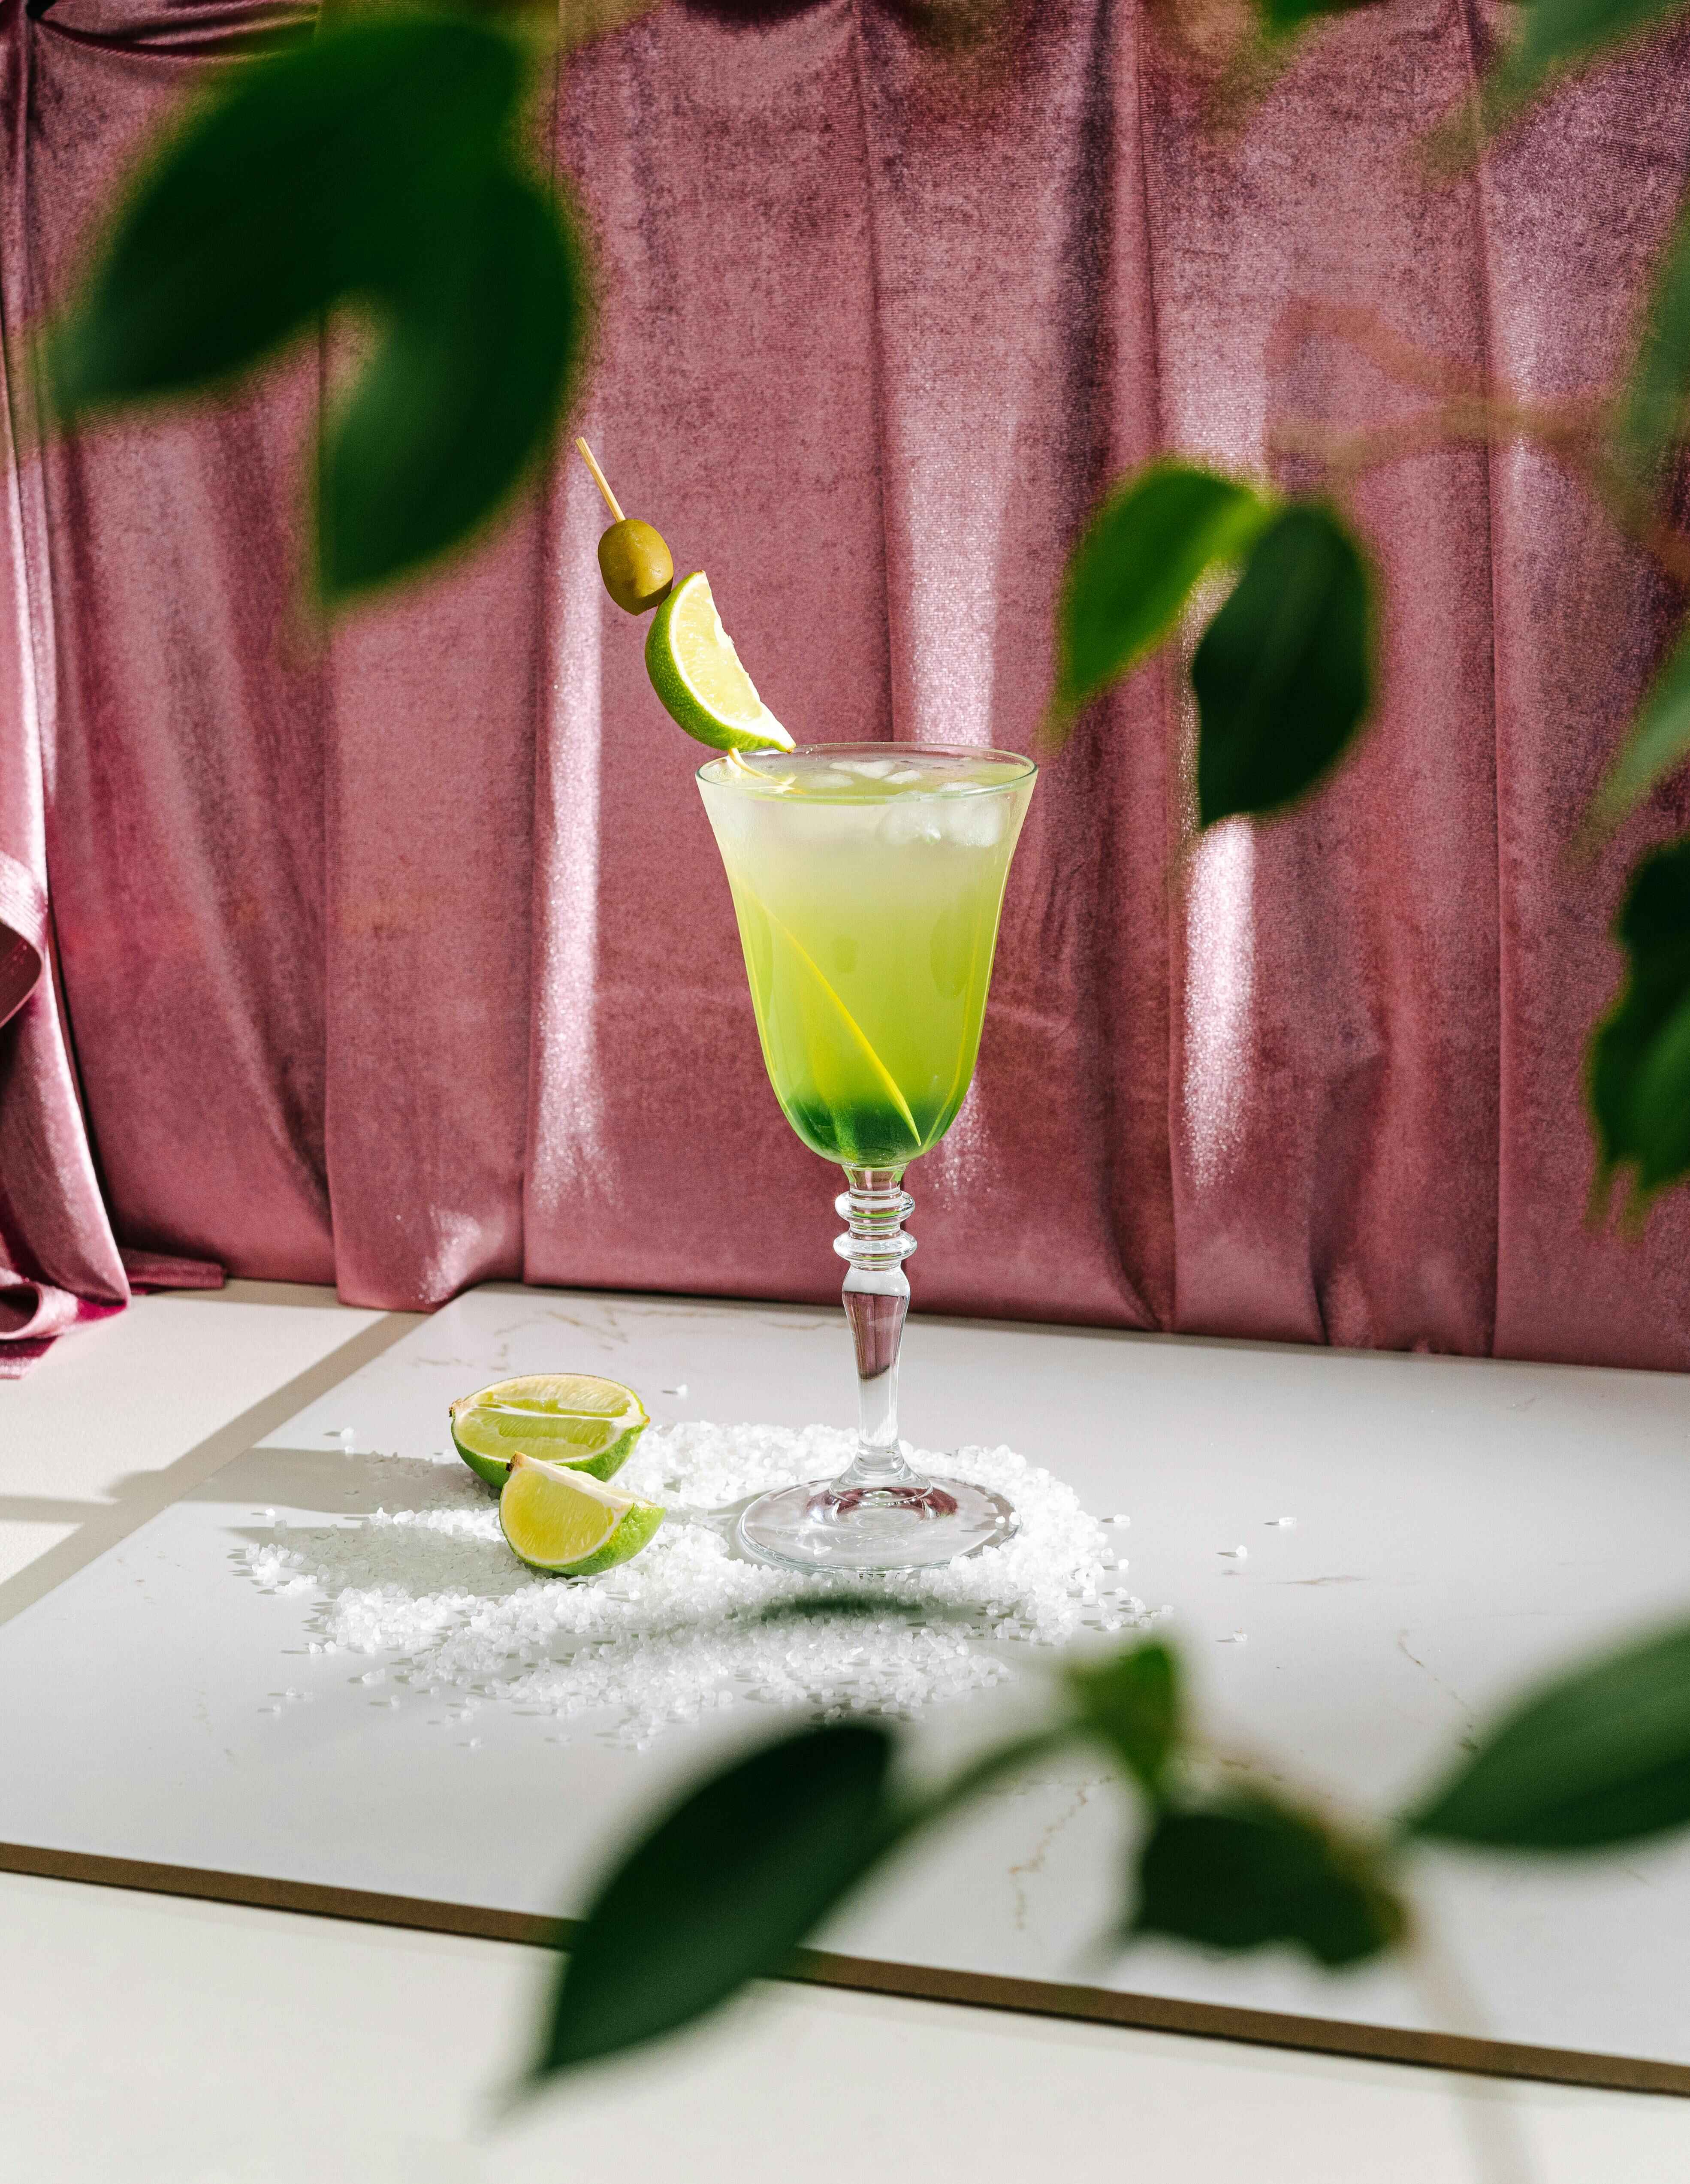 Sublime Sugarcane Smash Cocktail To Refresh Your Summers!